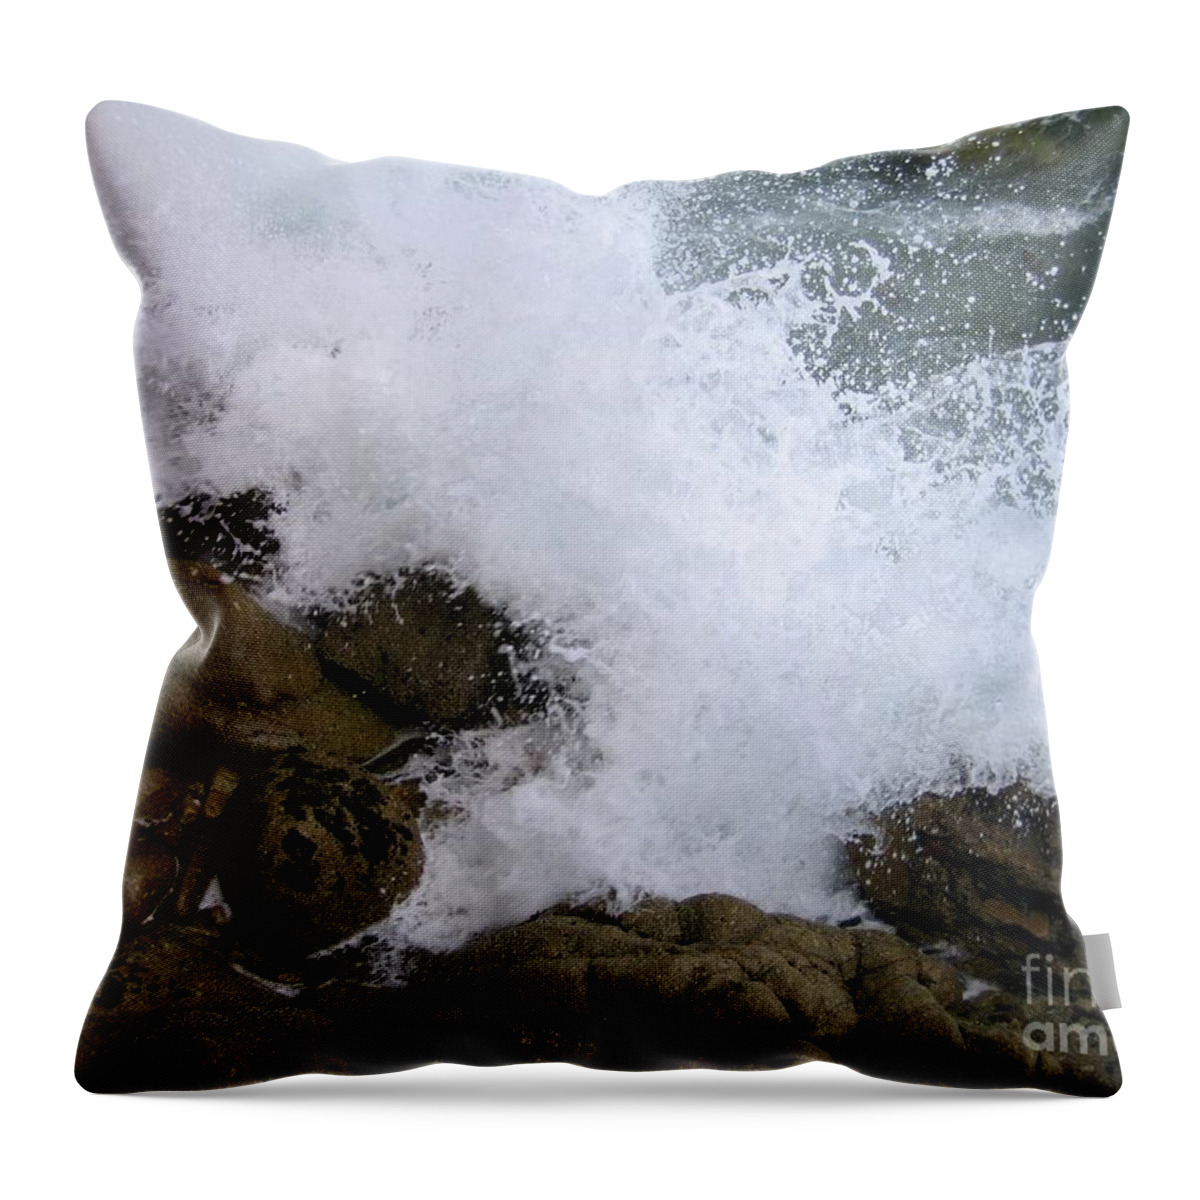 Splash Throw Pillow featuring the photograph Splash by James B Toy